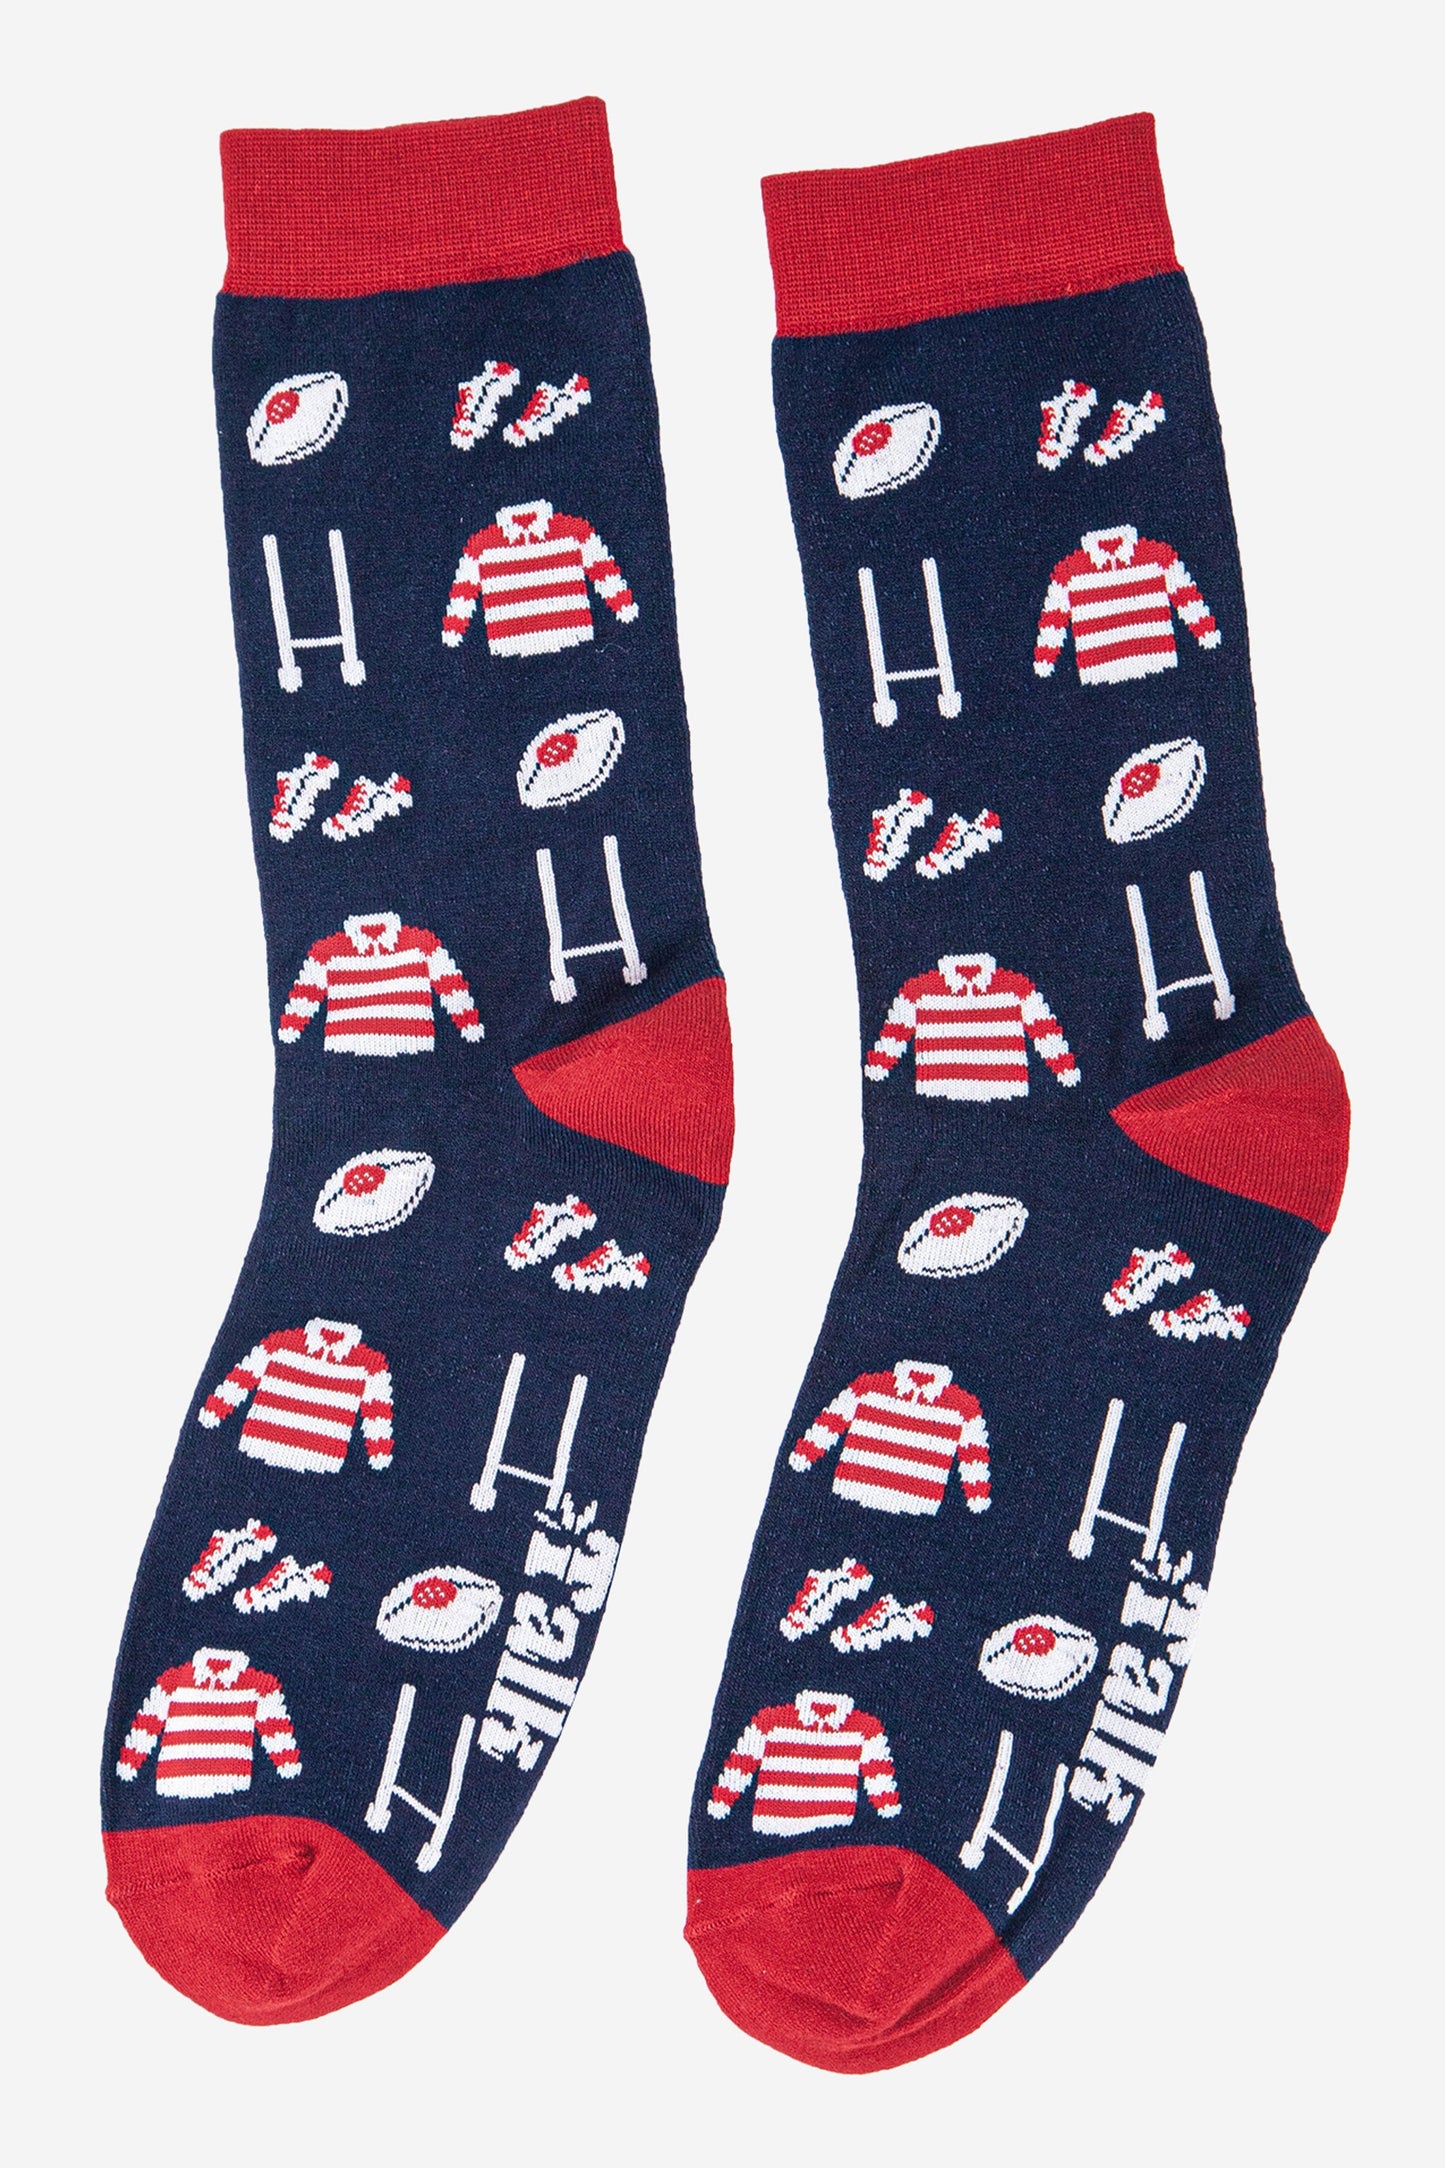 mens rugby socks in navy blue, red and white with a repeating pattern of rugby goals, balls, boot and shirts